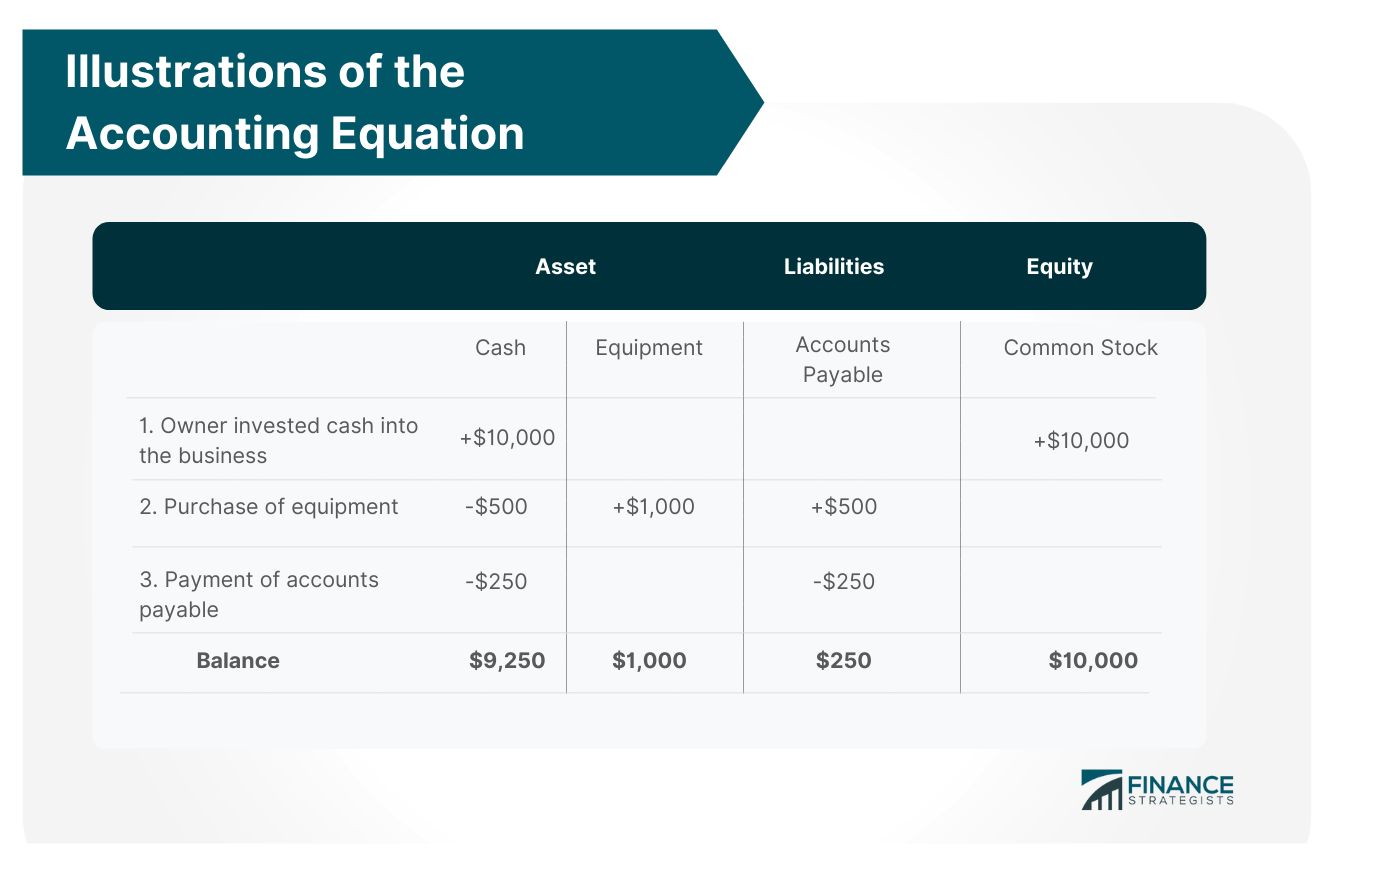 Illustrations_of_the_Accounting_Equation_Image_3